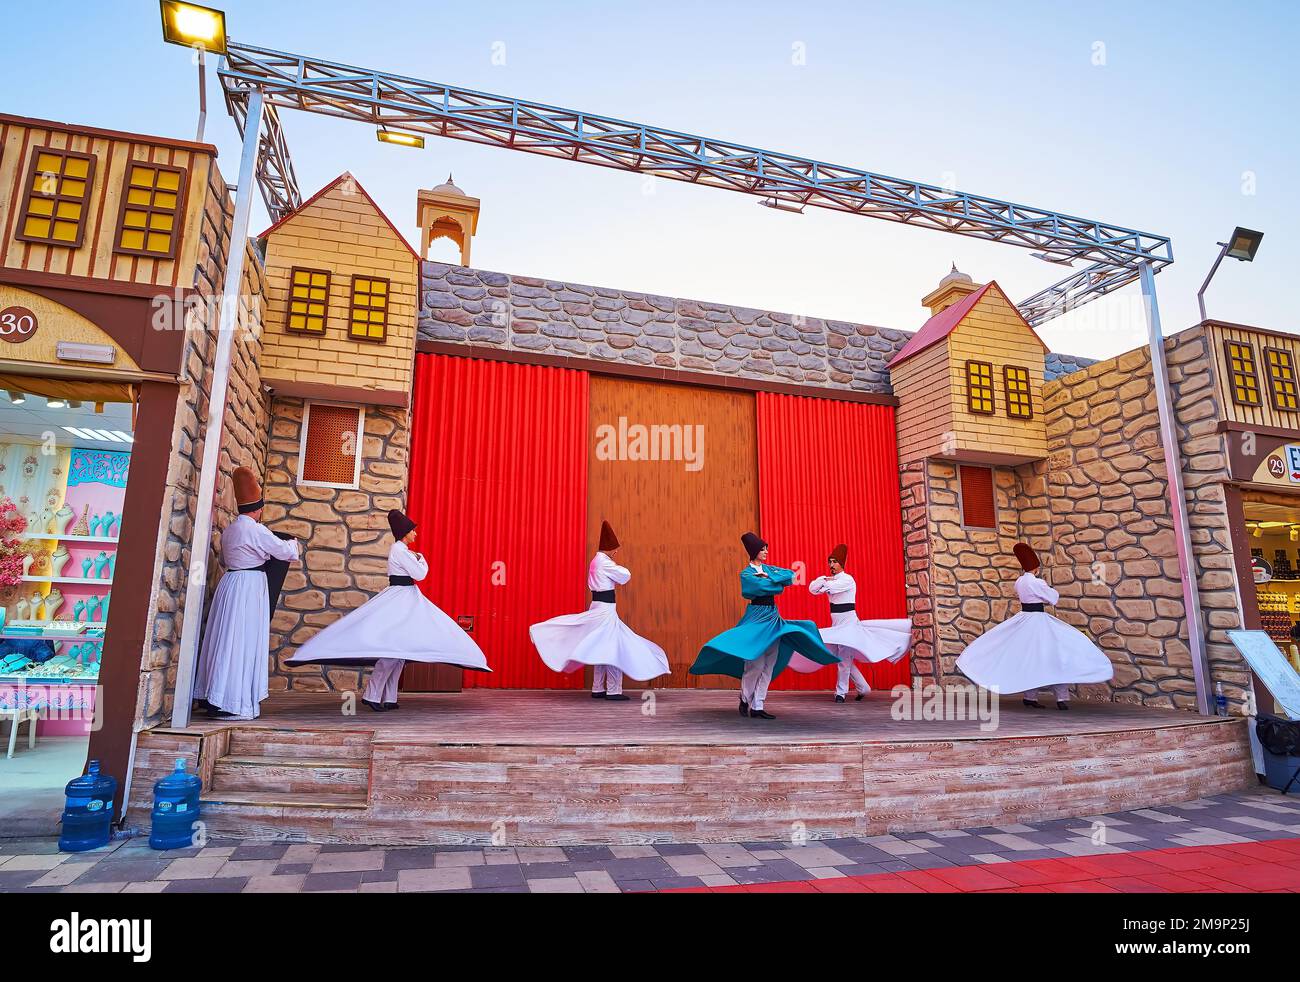 DUBAI, UAE - MARCH 6, 2020: The Pavilion of Turkey of Global Village Dubai attracts visitors with Whirling Dervishes performance, on March 6 in Dubai Stock Photo